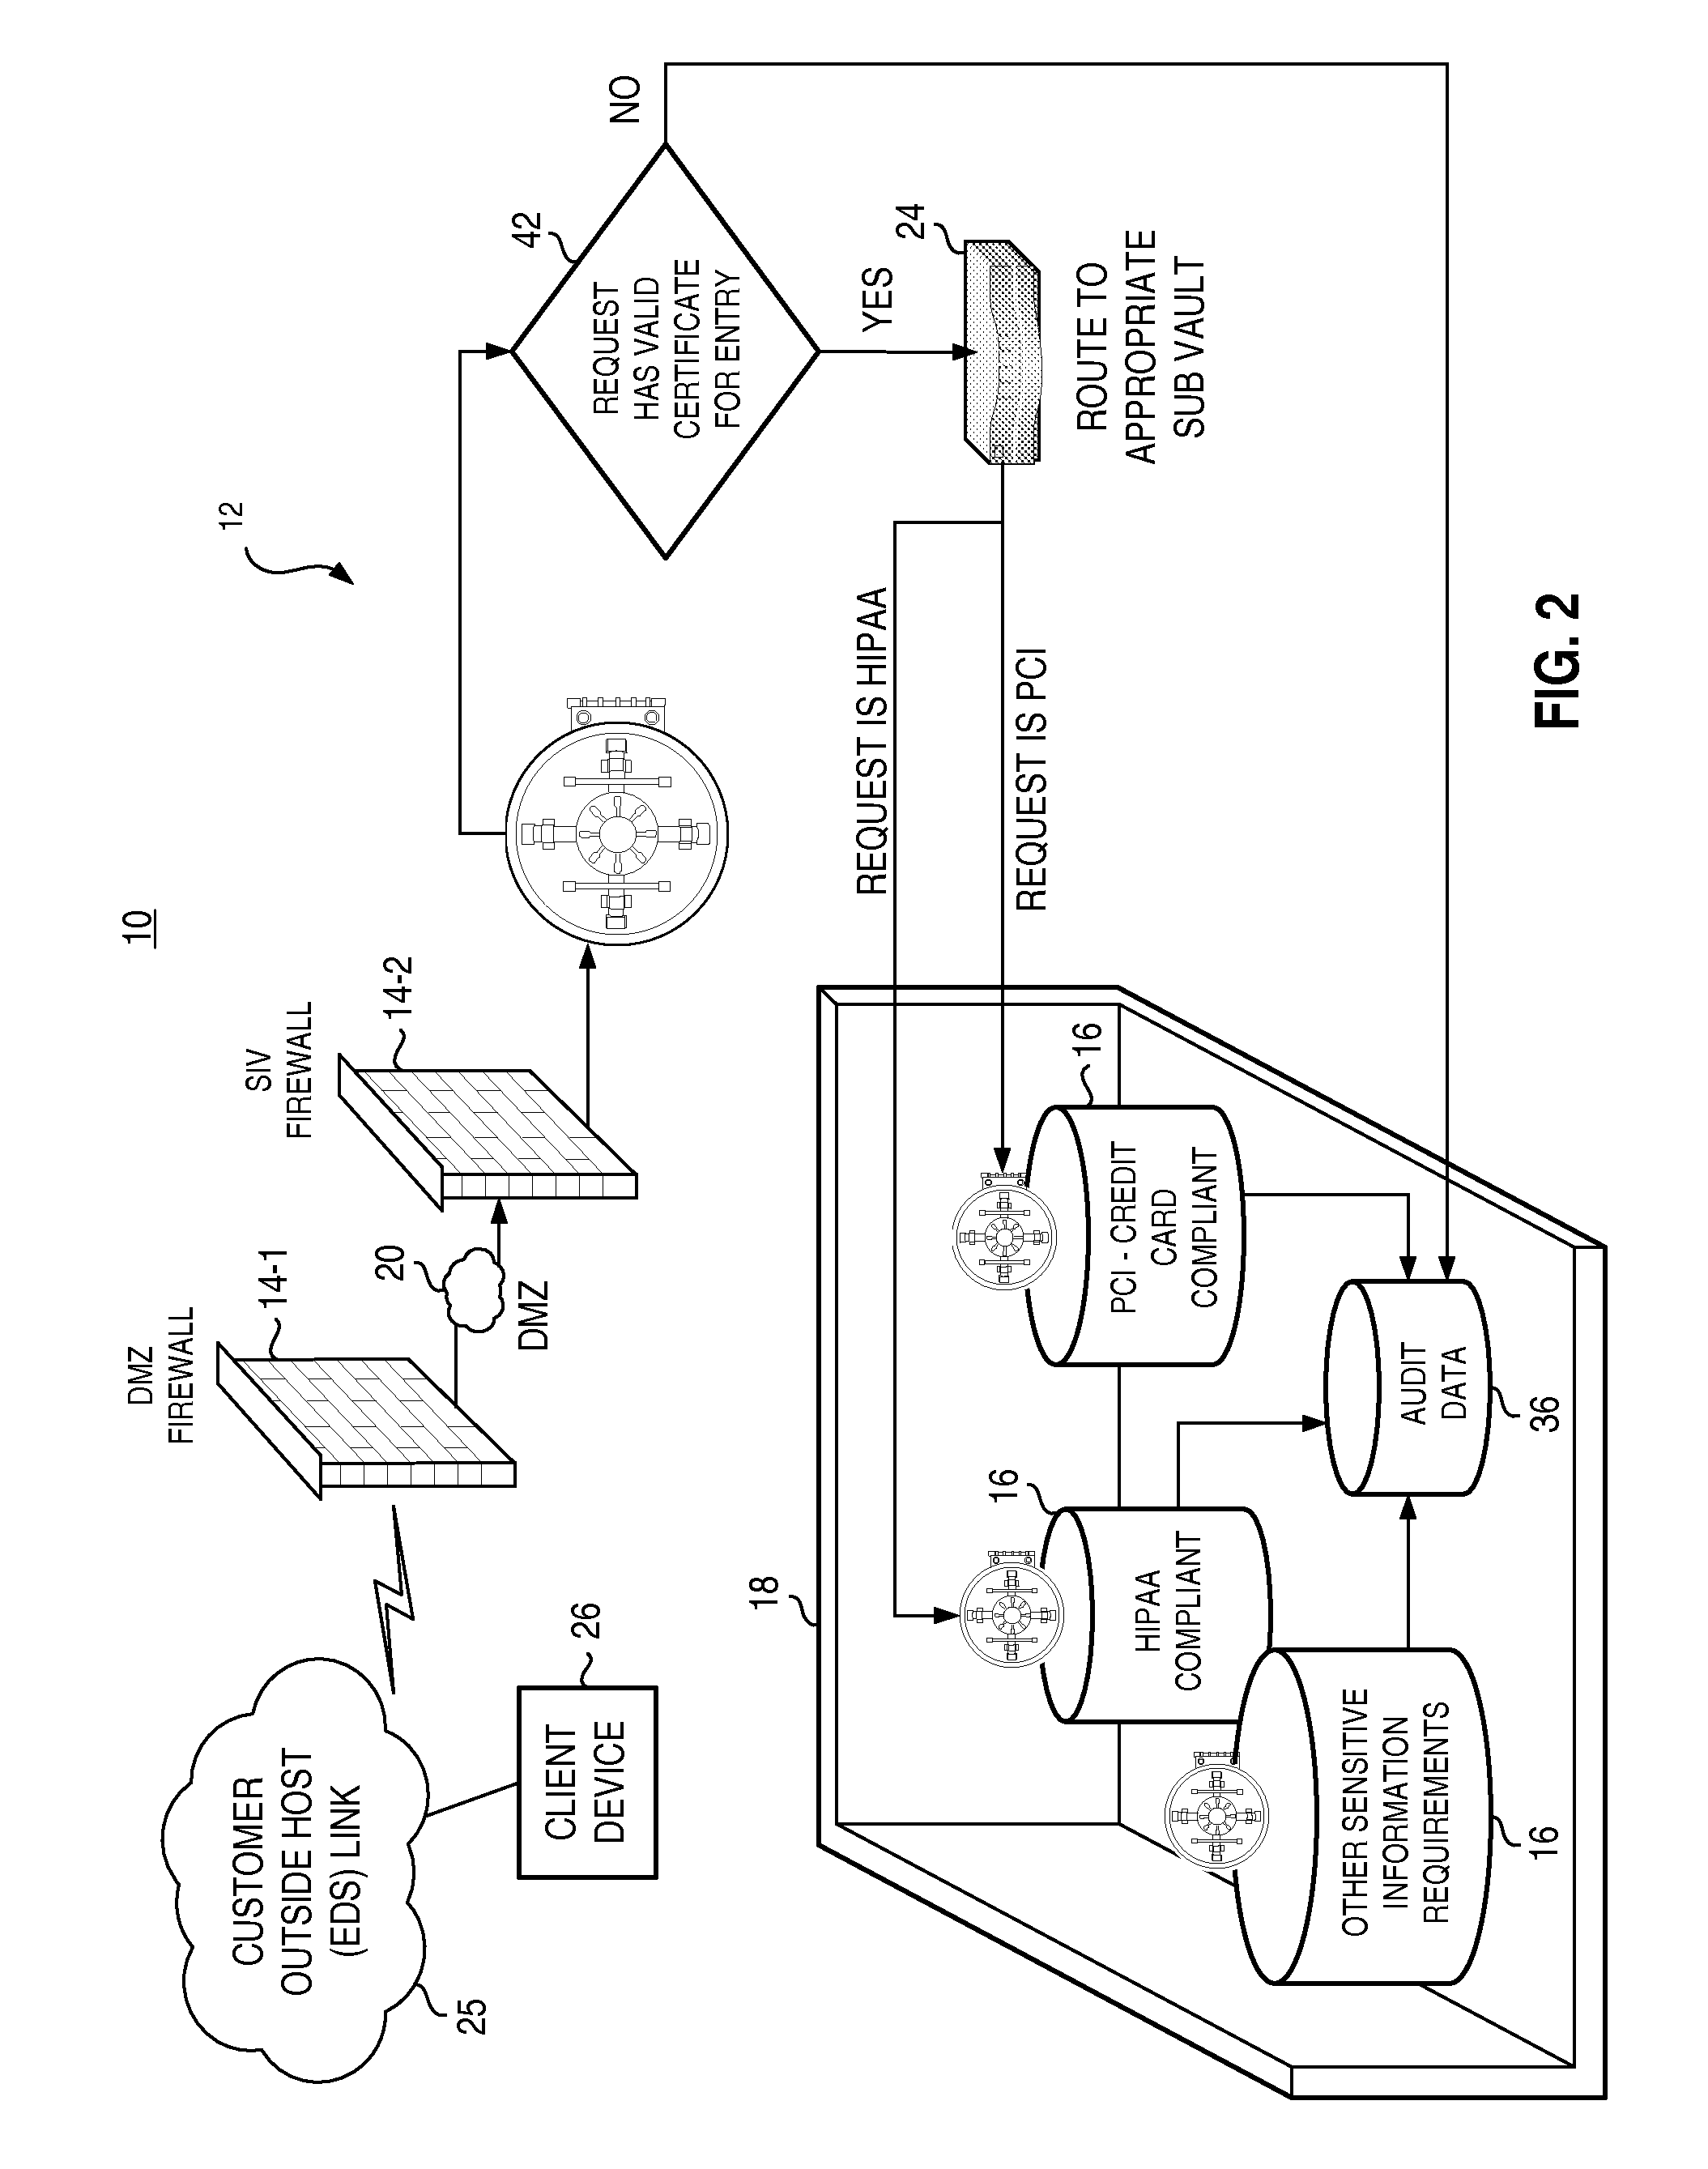 Data depository and associated methodology providing secure access pursuant to compliance standard conformity